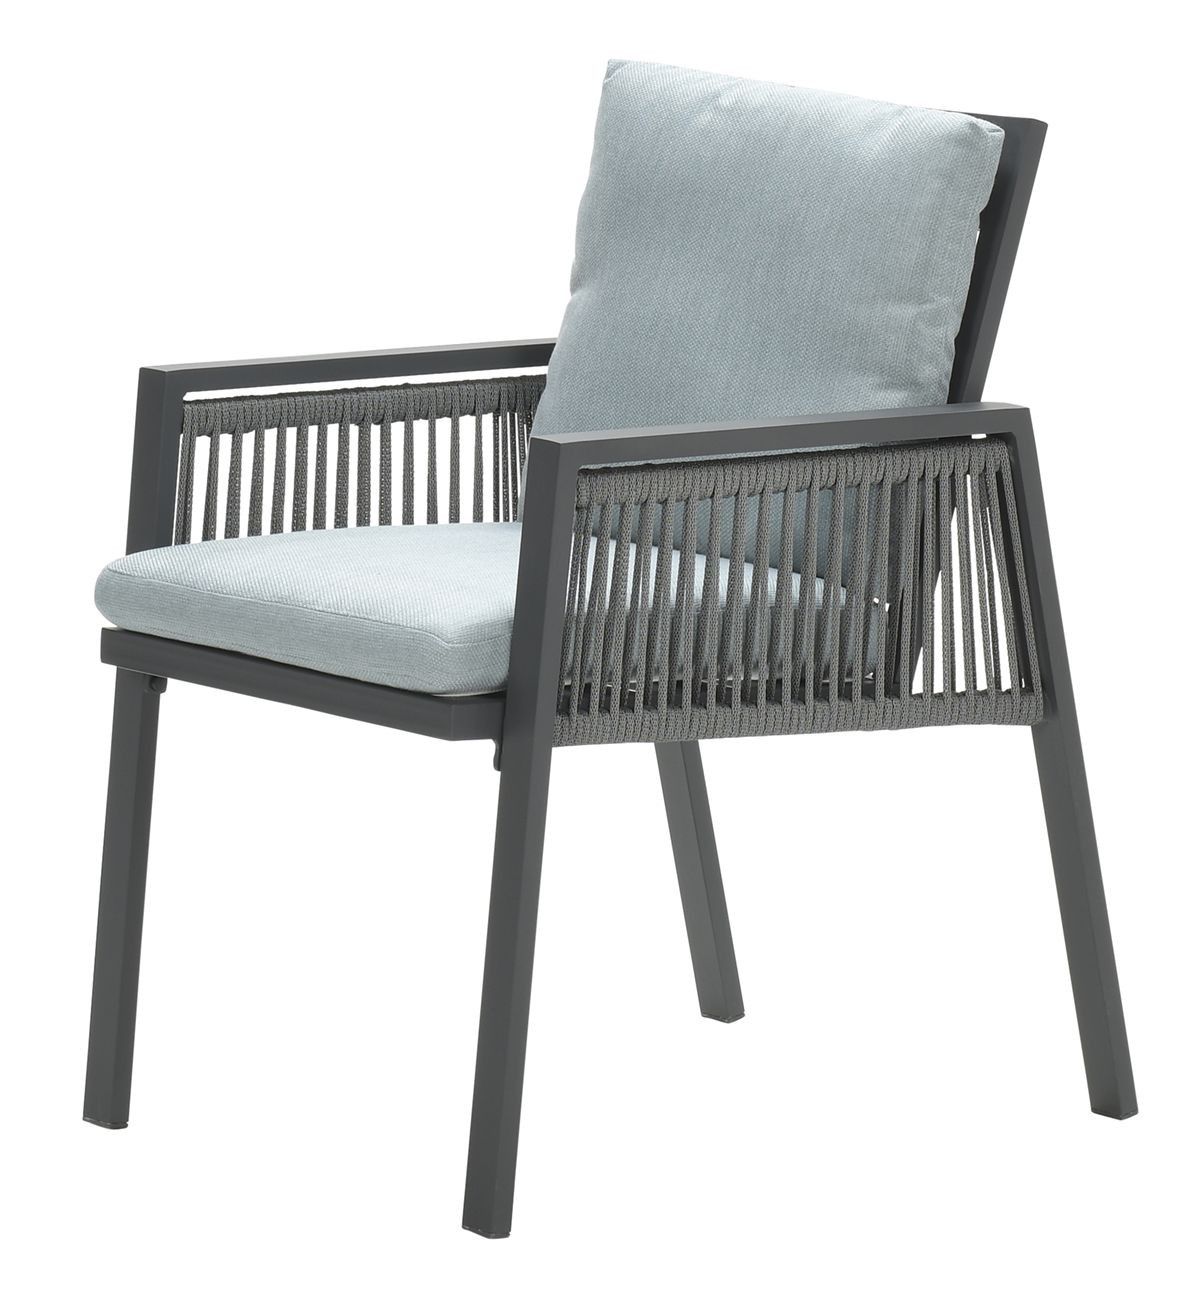 Garden Impressions - Andrea Dining Chair - Beyond outdoor living